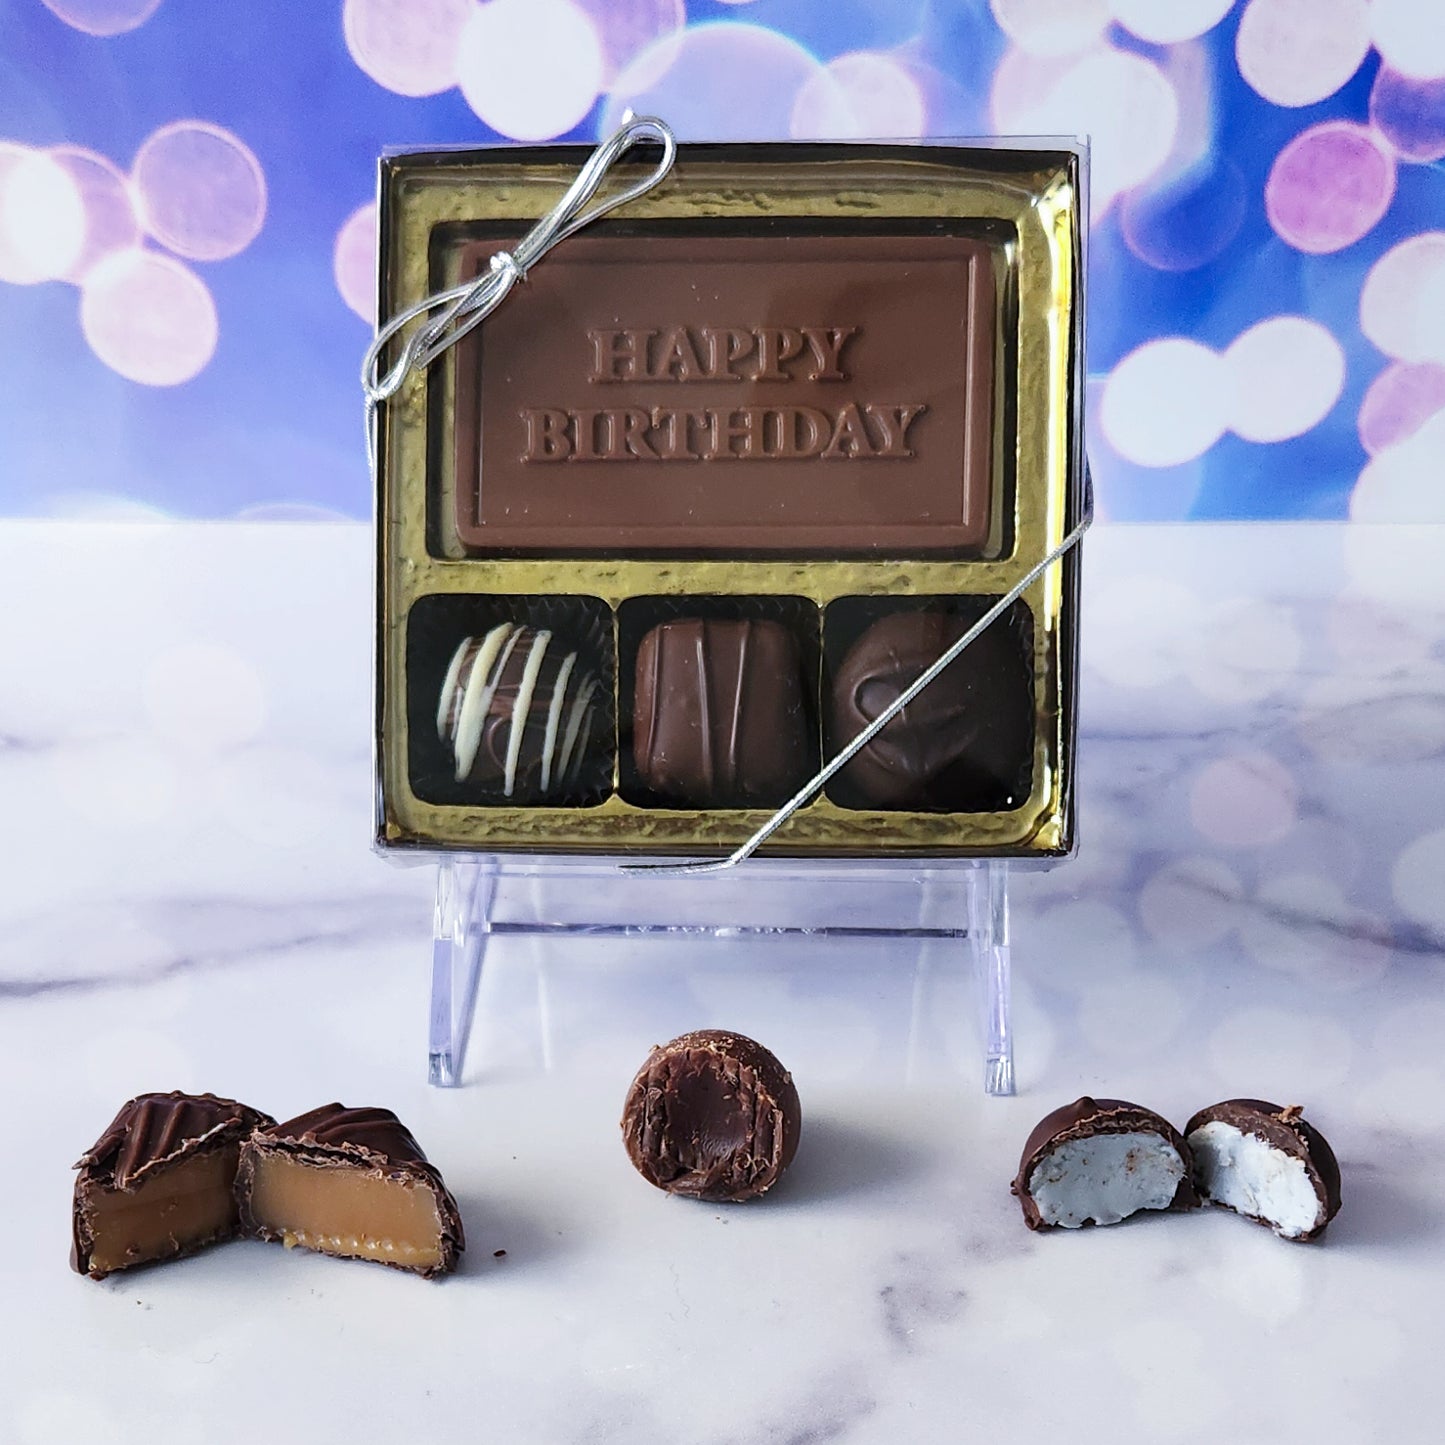 Add a touch of sweetness to their special day with our 3-piece Happy Birthday Candy Box! Inside, a beautifully crafted milk chocolate card that says "Happy Birthday" is paired with a trio consisting of creamy soft center cream, a rich truffle, and a delightful caramel. It's the perfect petite treat to celebrate their birthday!